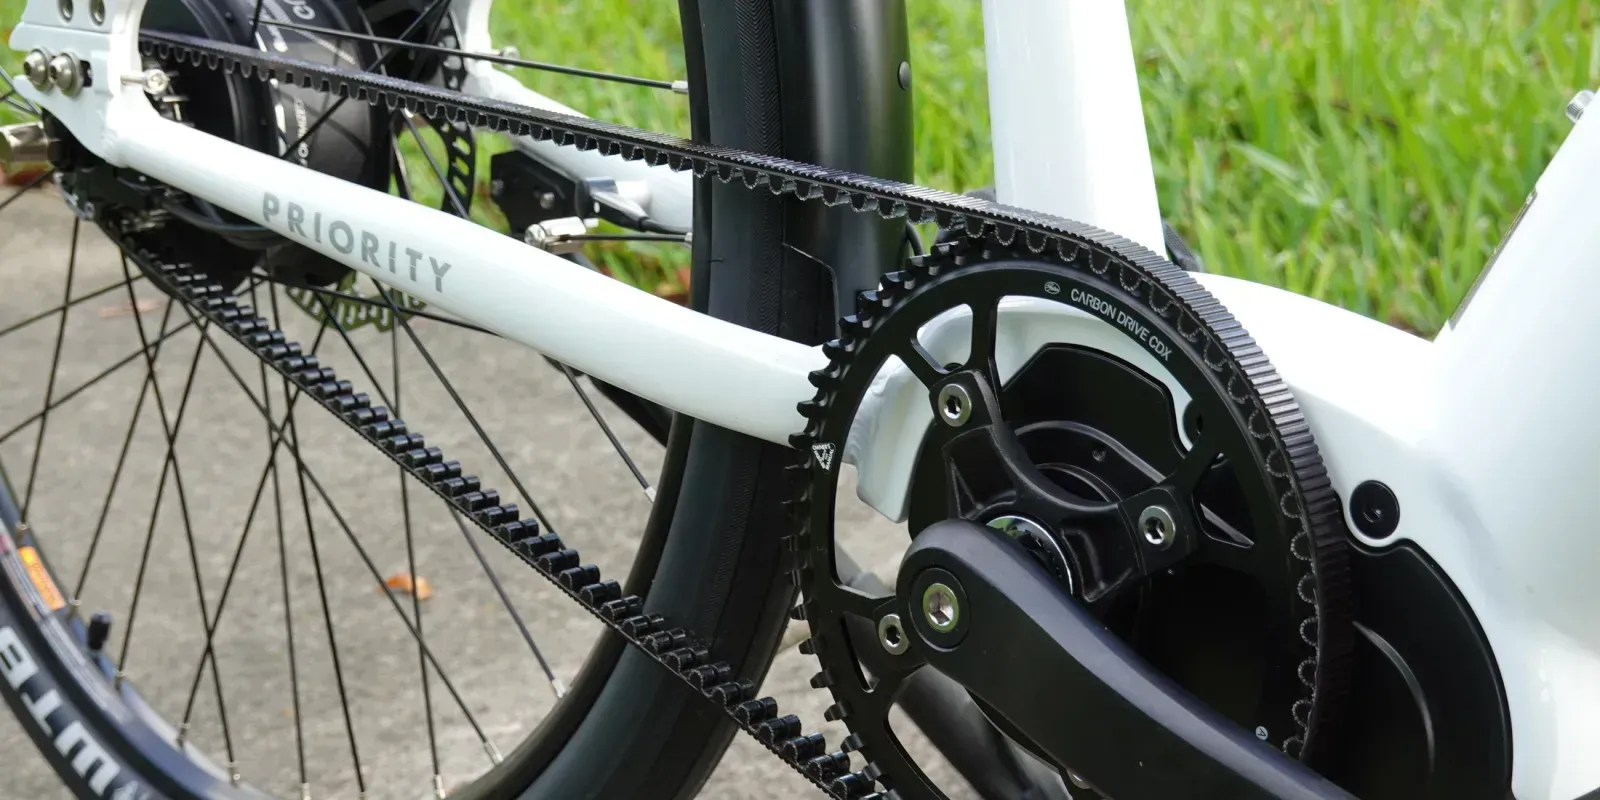 Magiccycle - Belt Drive Ebike Review